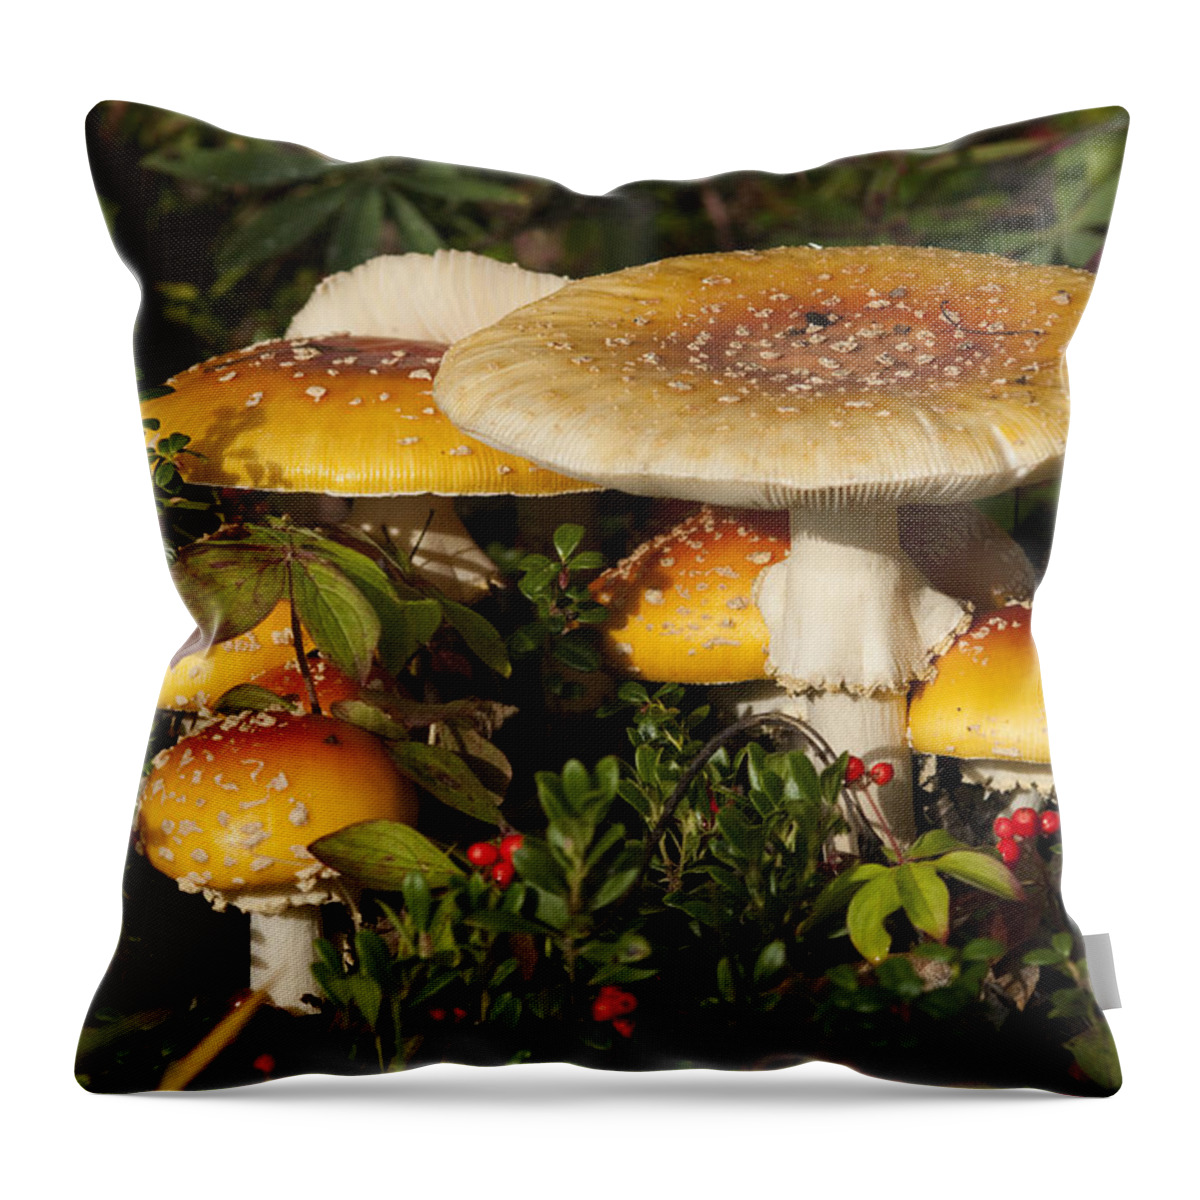 530802 Throw Pillow featuring the photograph Poisonous Fly Agaric Mushrooms Yukon by Michael Quinton